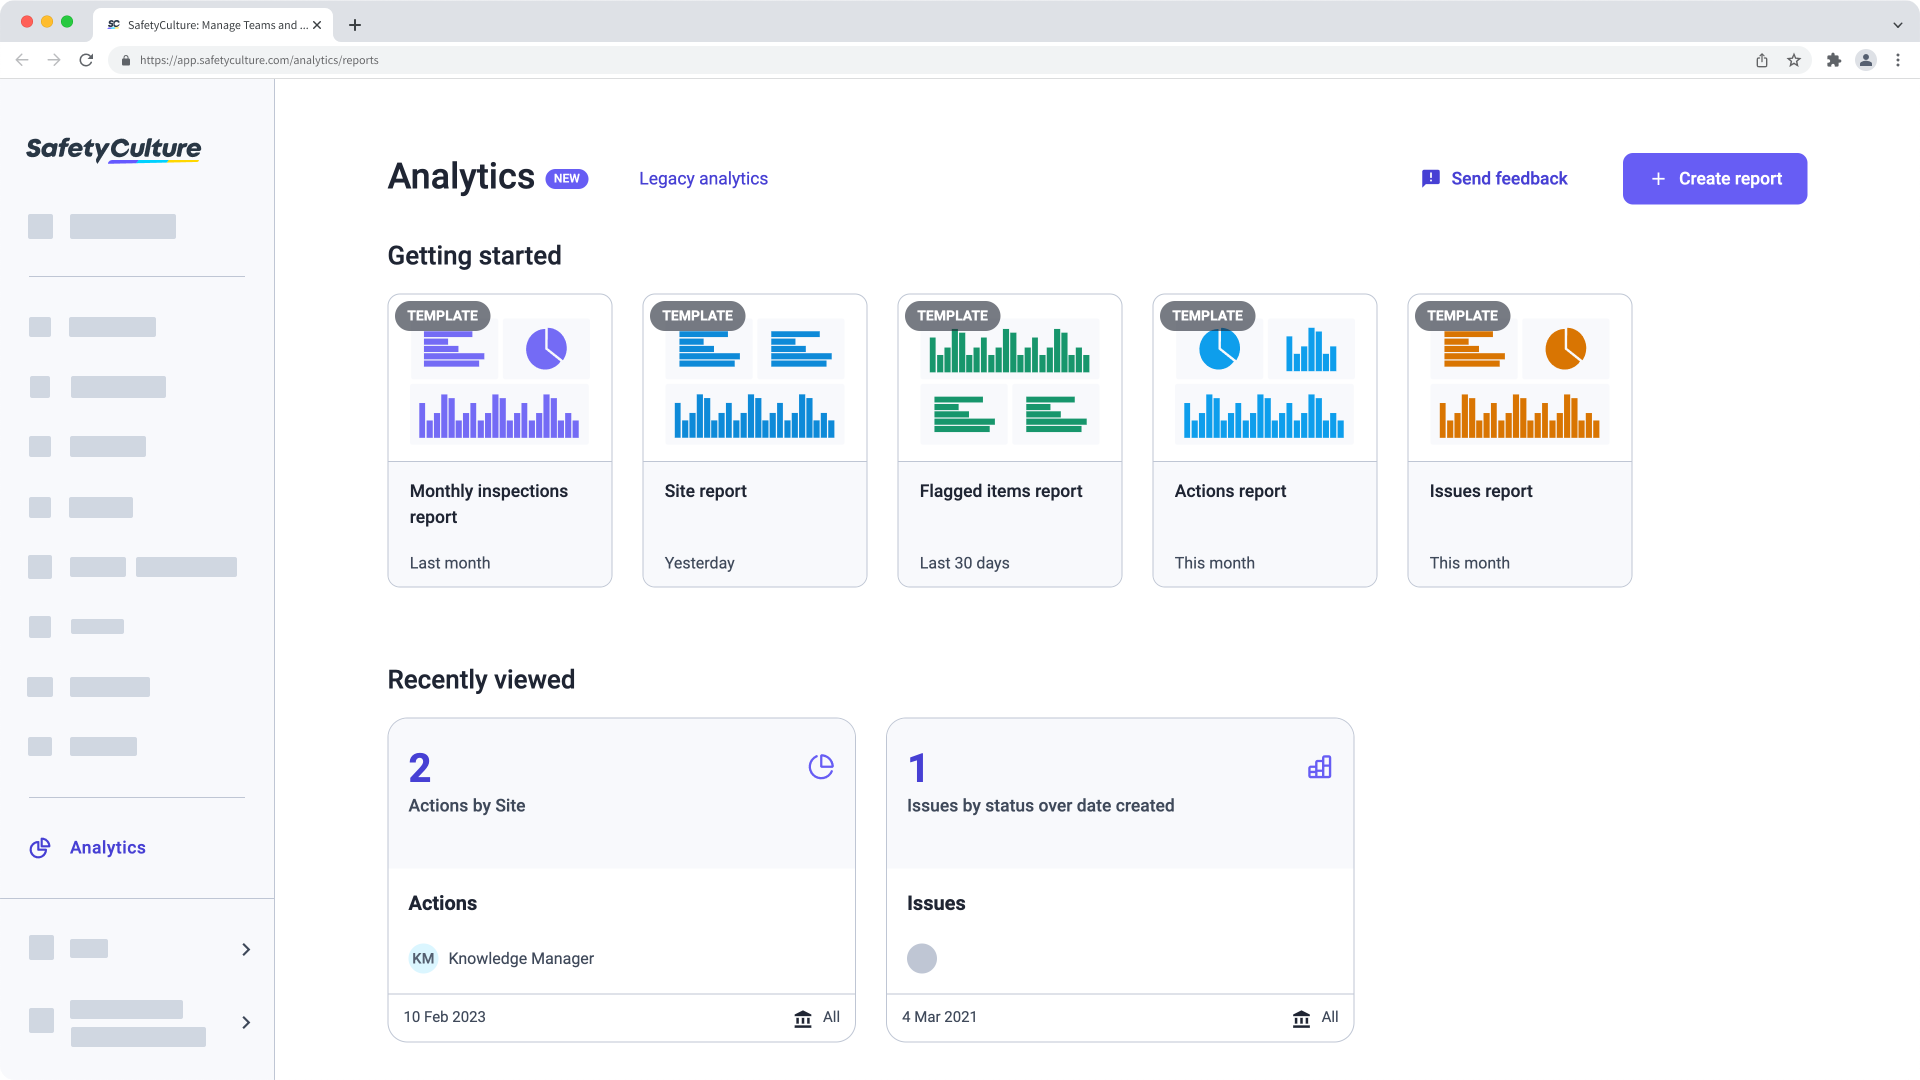 New Analytics experience landing page on the web app.